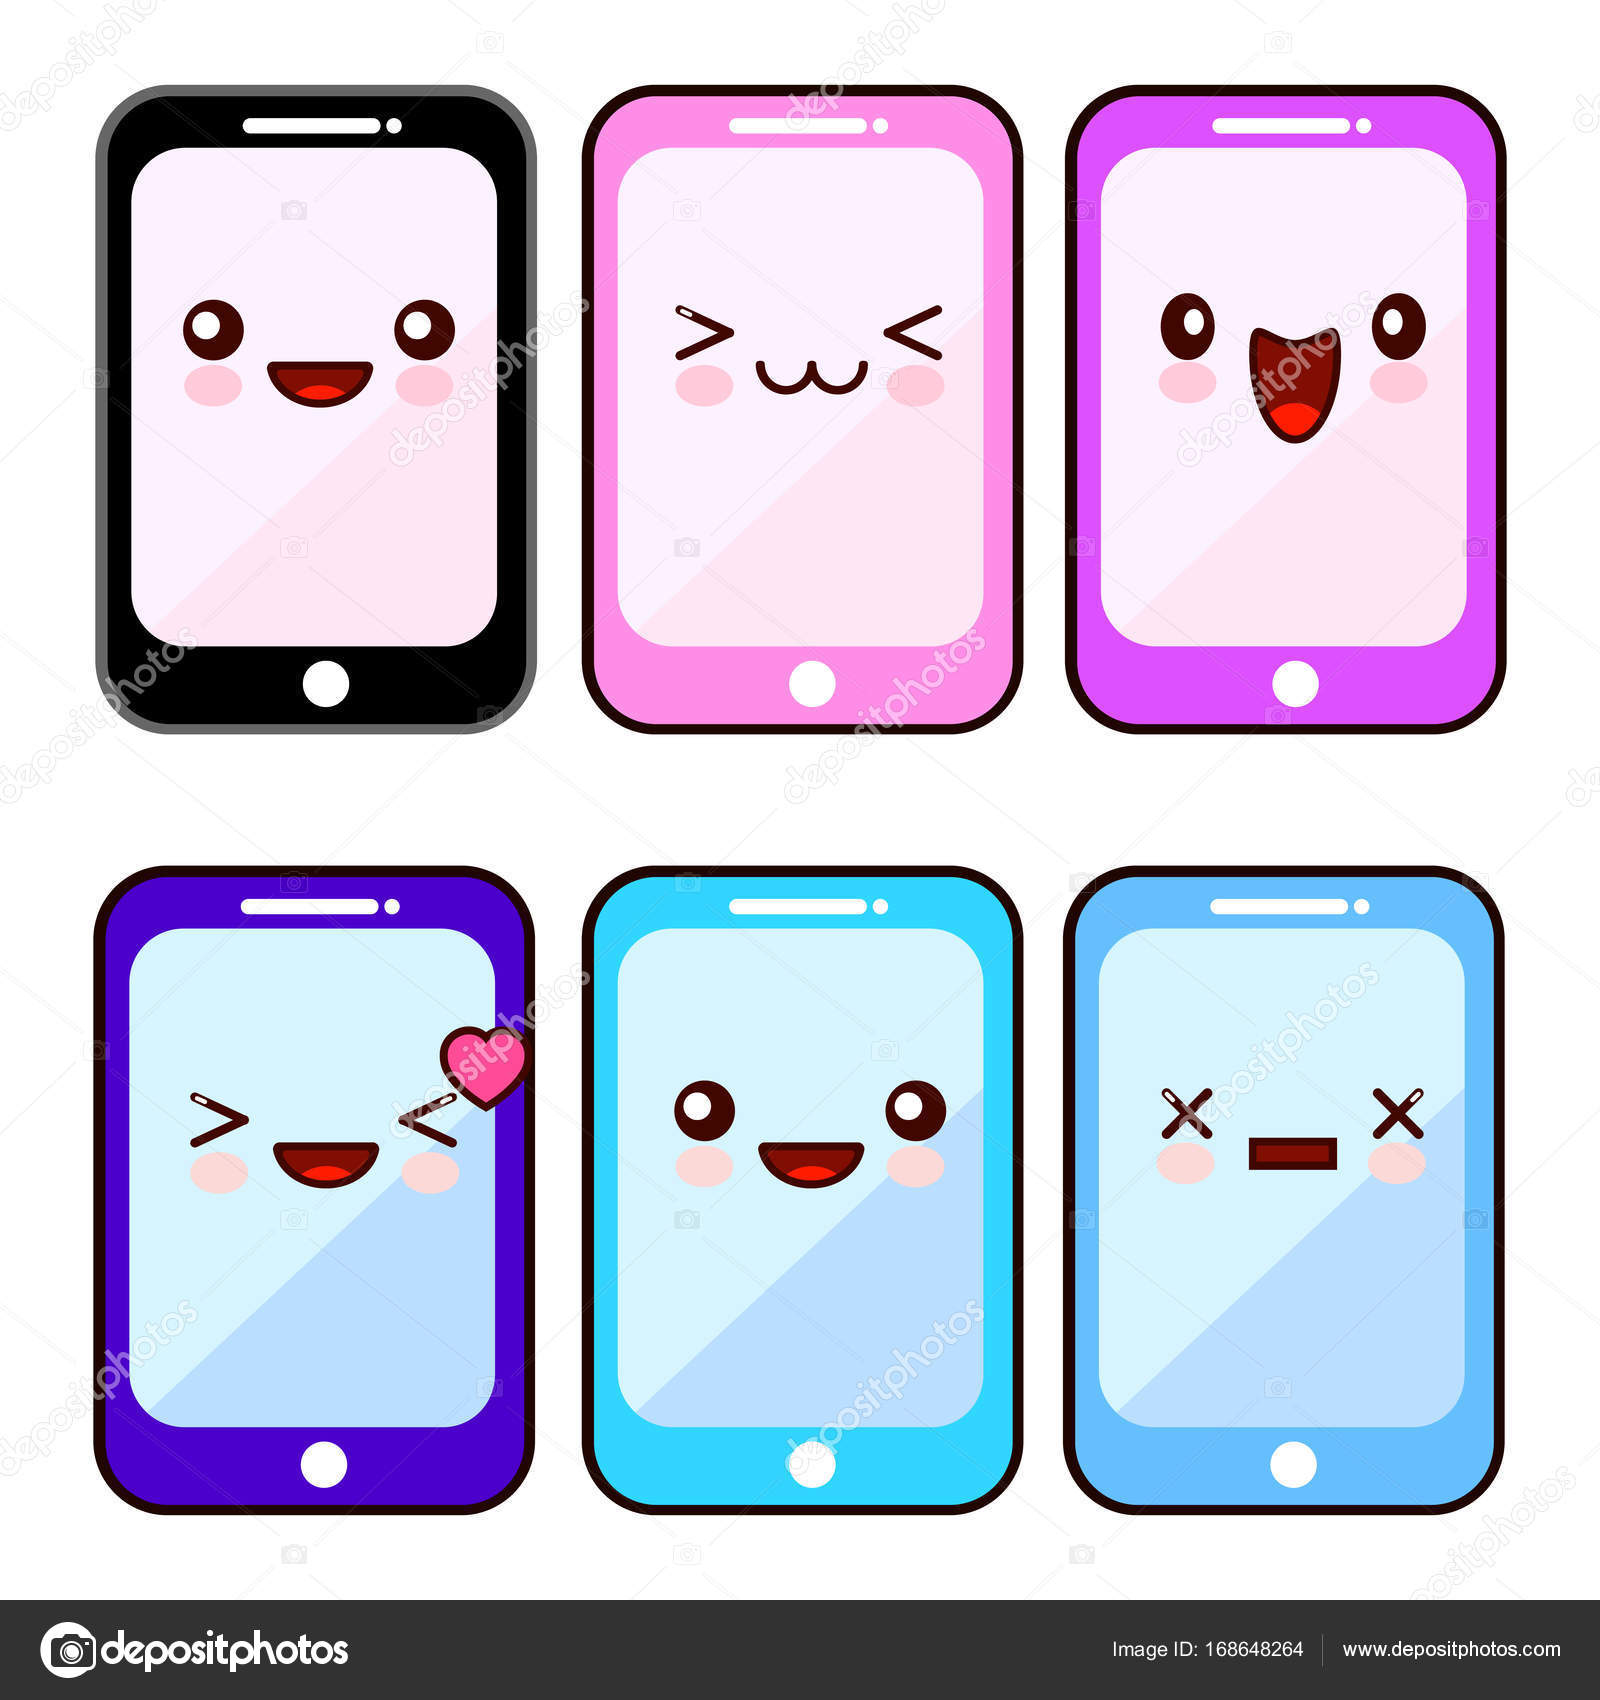 smiley face with cell phone clipart